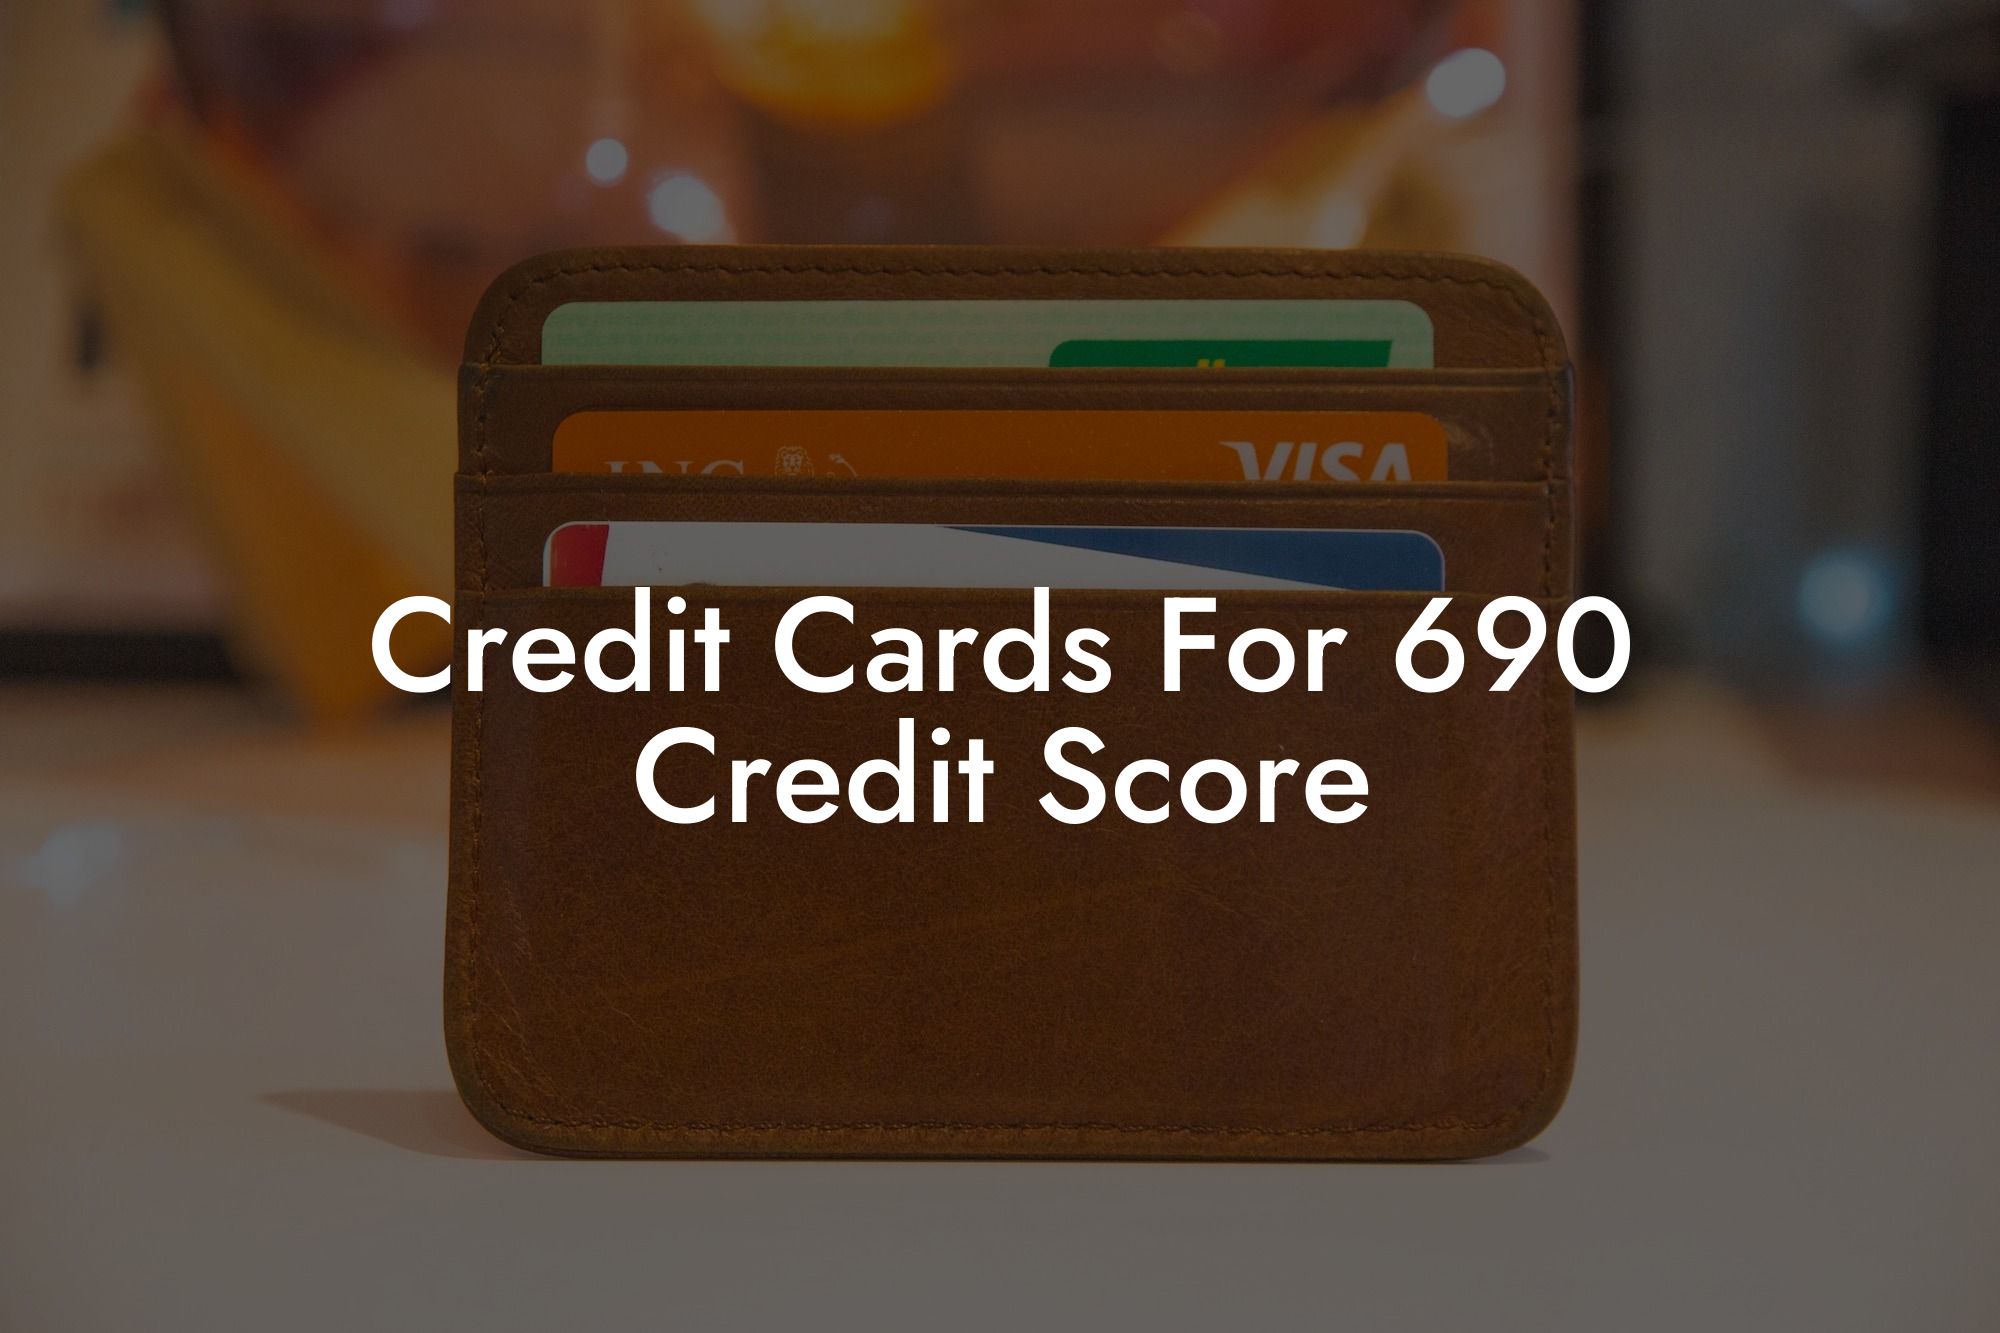 Credit Cards For 690 Credit Score